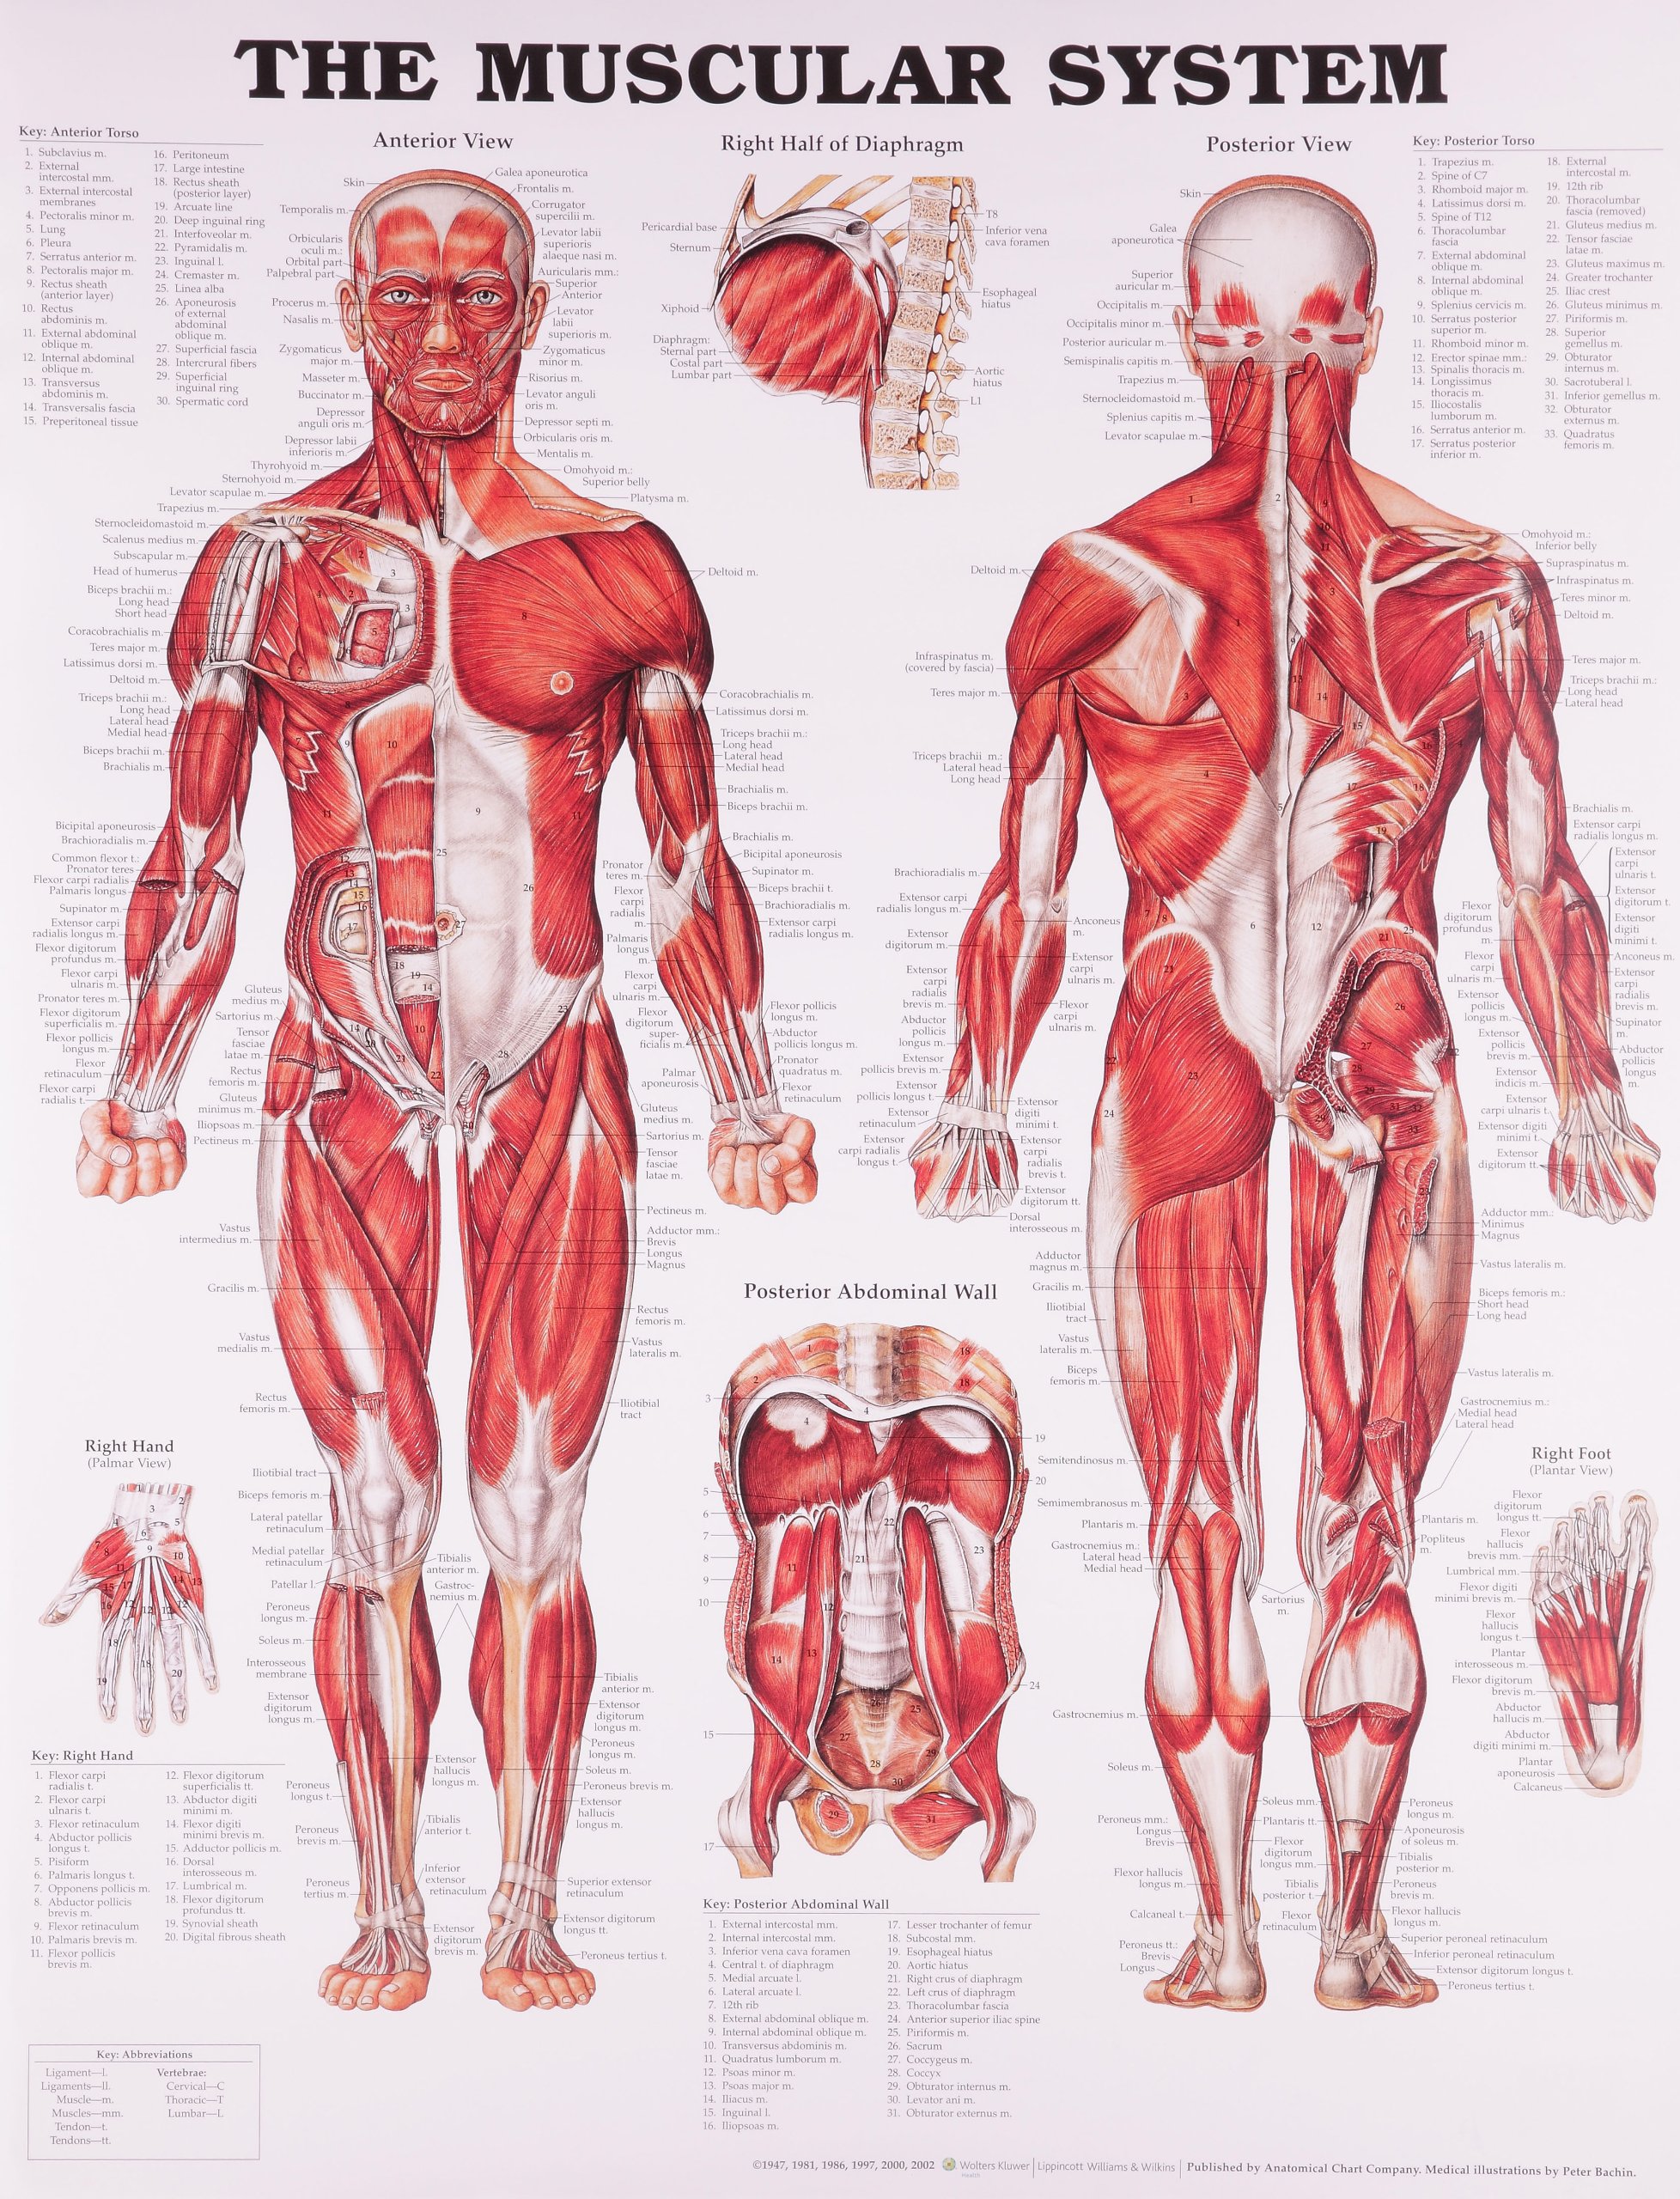 THE MUSCULAR SYSTEM ANATOMICAL CHART